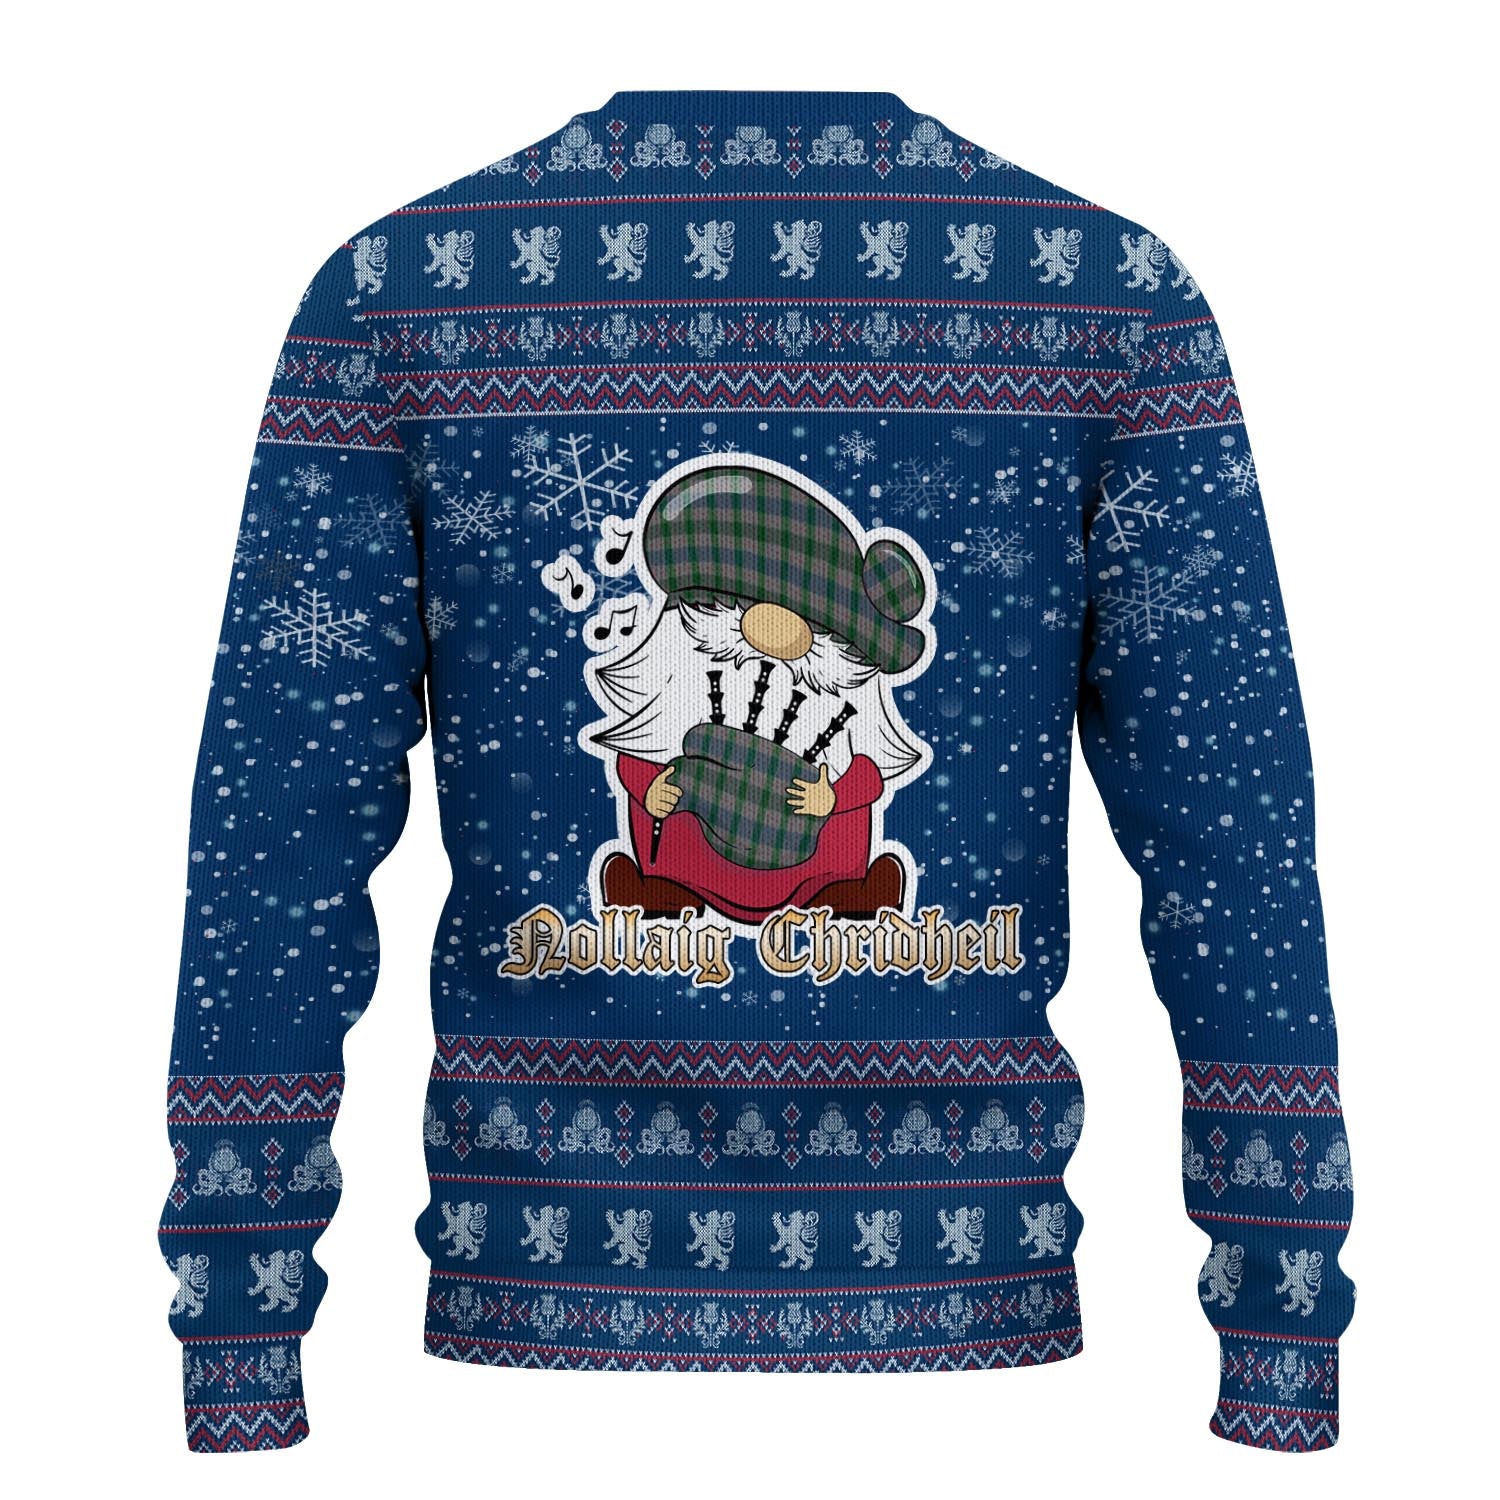 Lloyd of Wales Clan Christmas Family Knitted Sweater with Funny Gnome Playing Bagpipes - Tartanvibesclothing